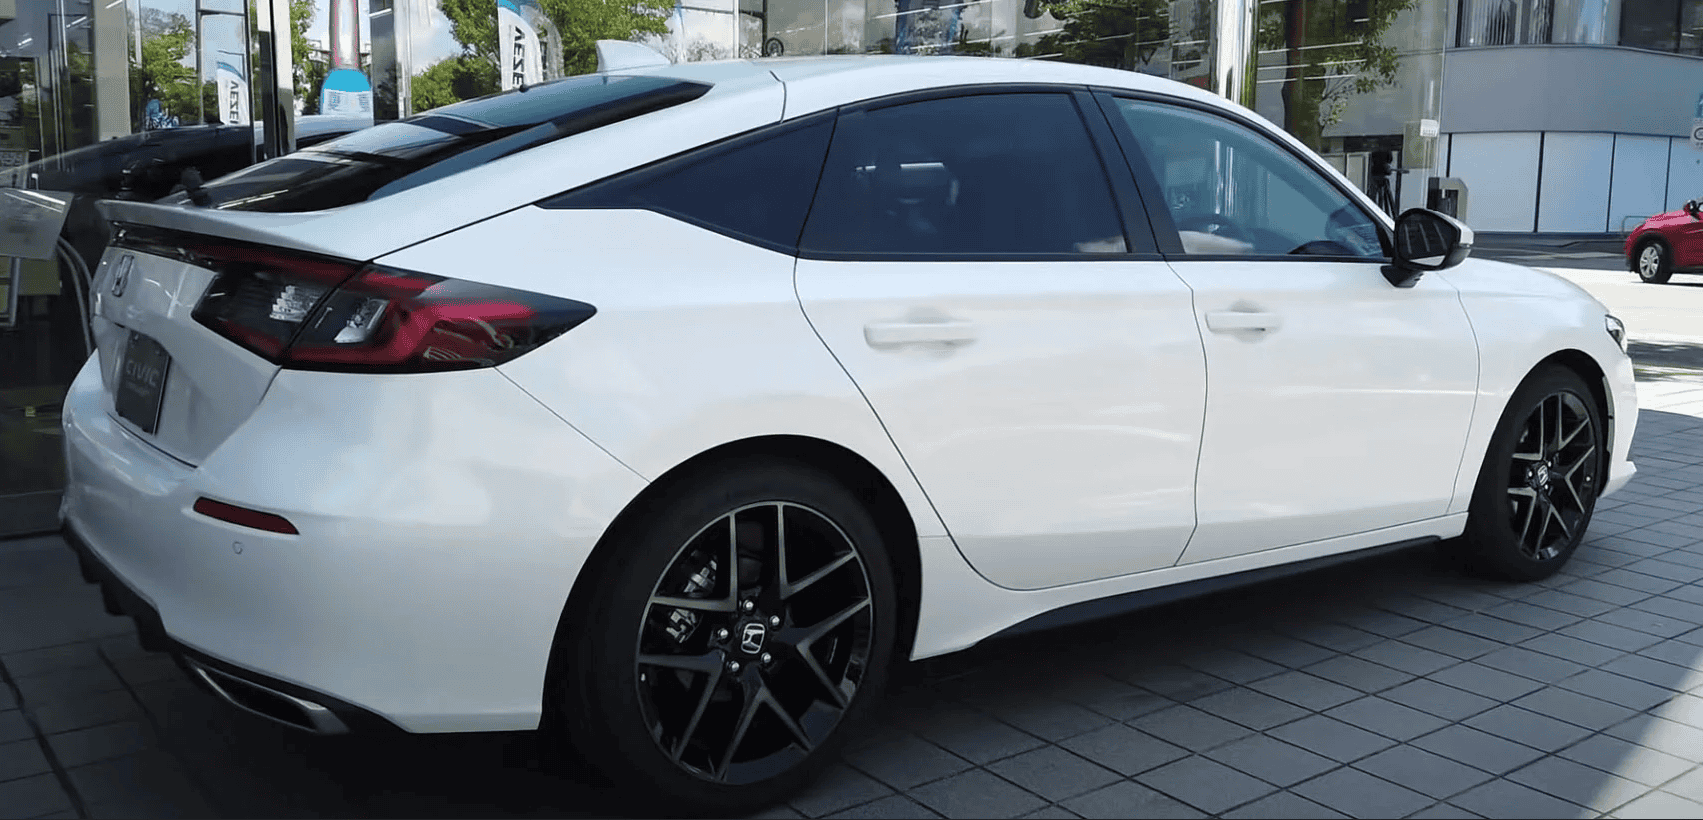 2022 Civic Hatchback looks great in Platinum White with black trim